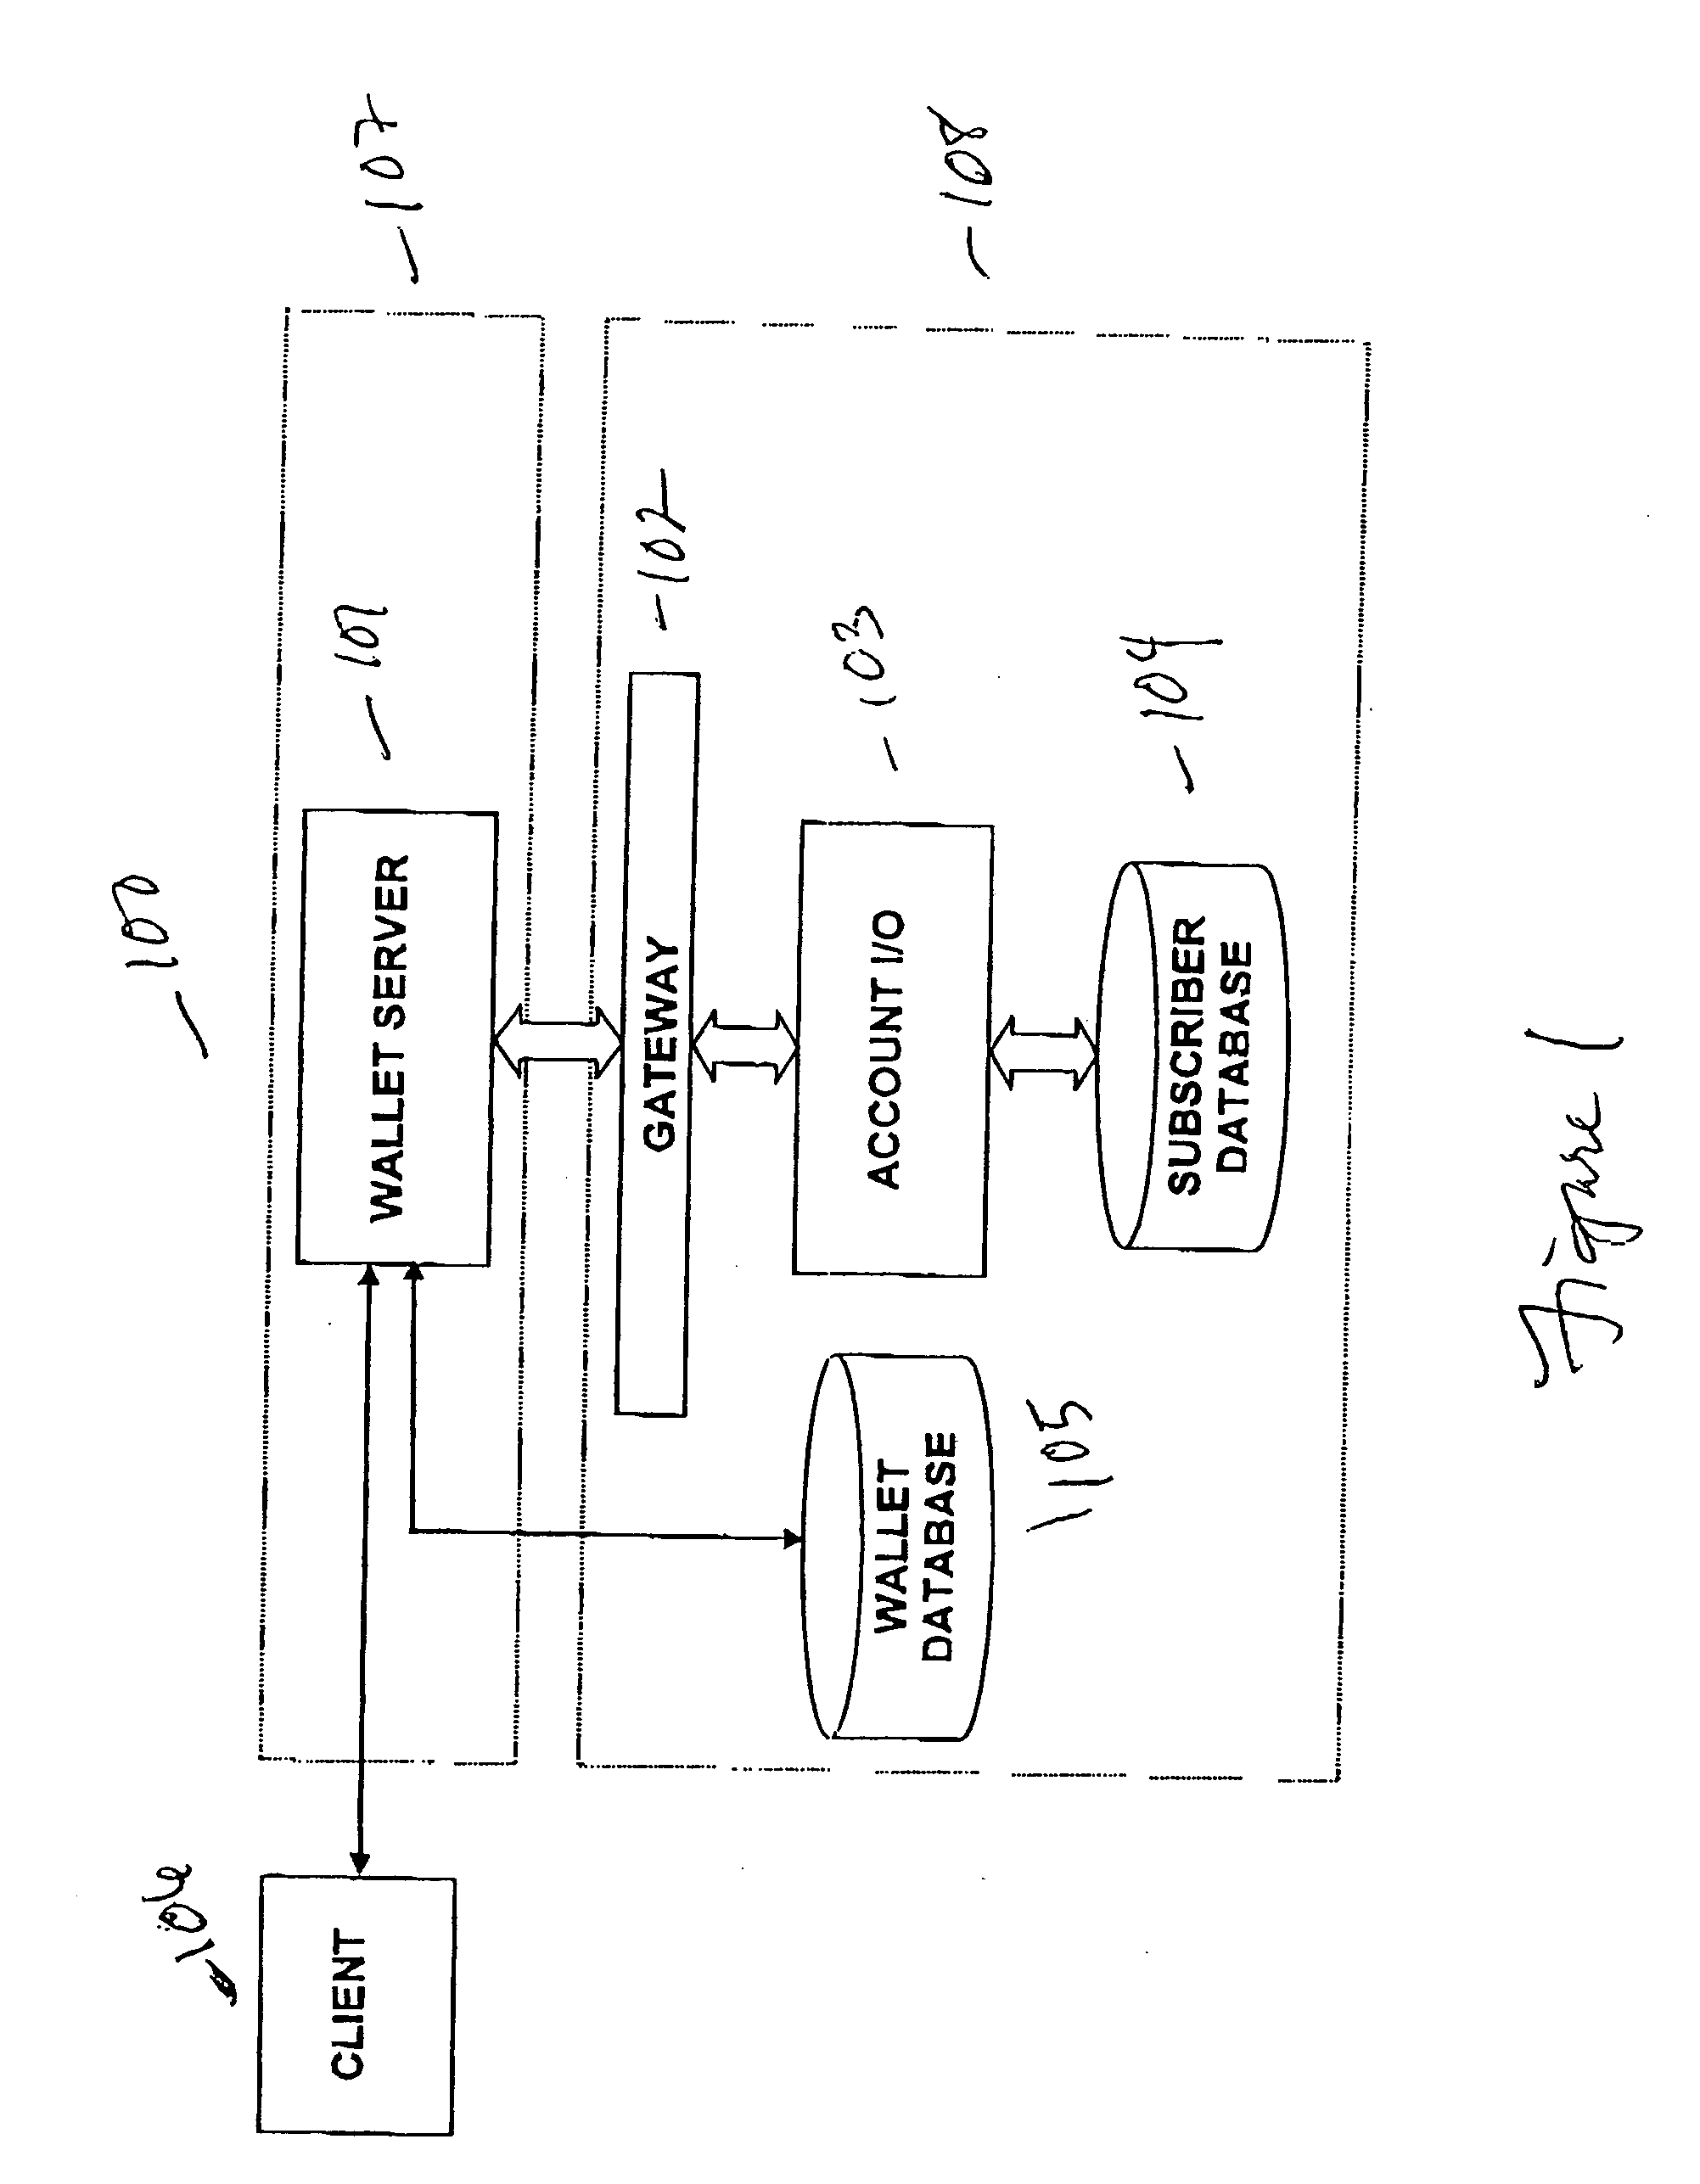 System and method for electronic wallet conversion